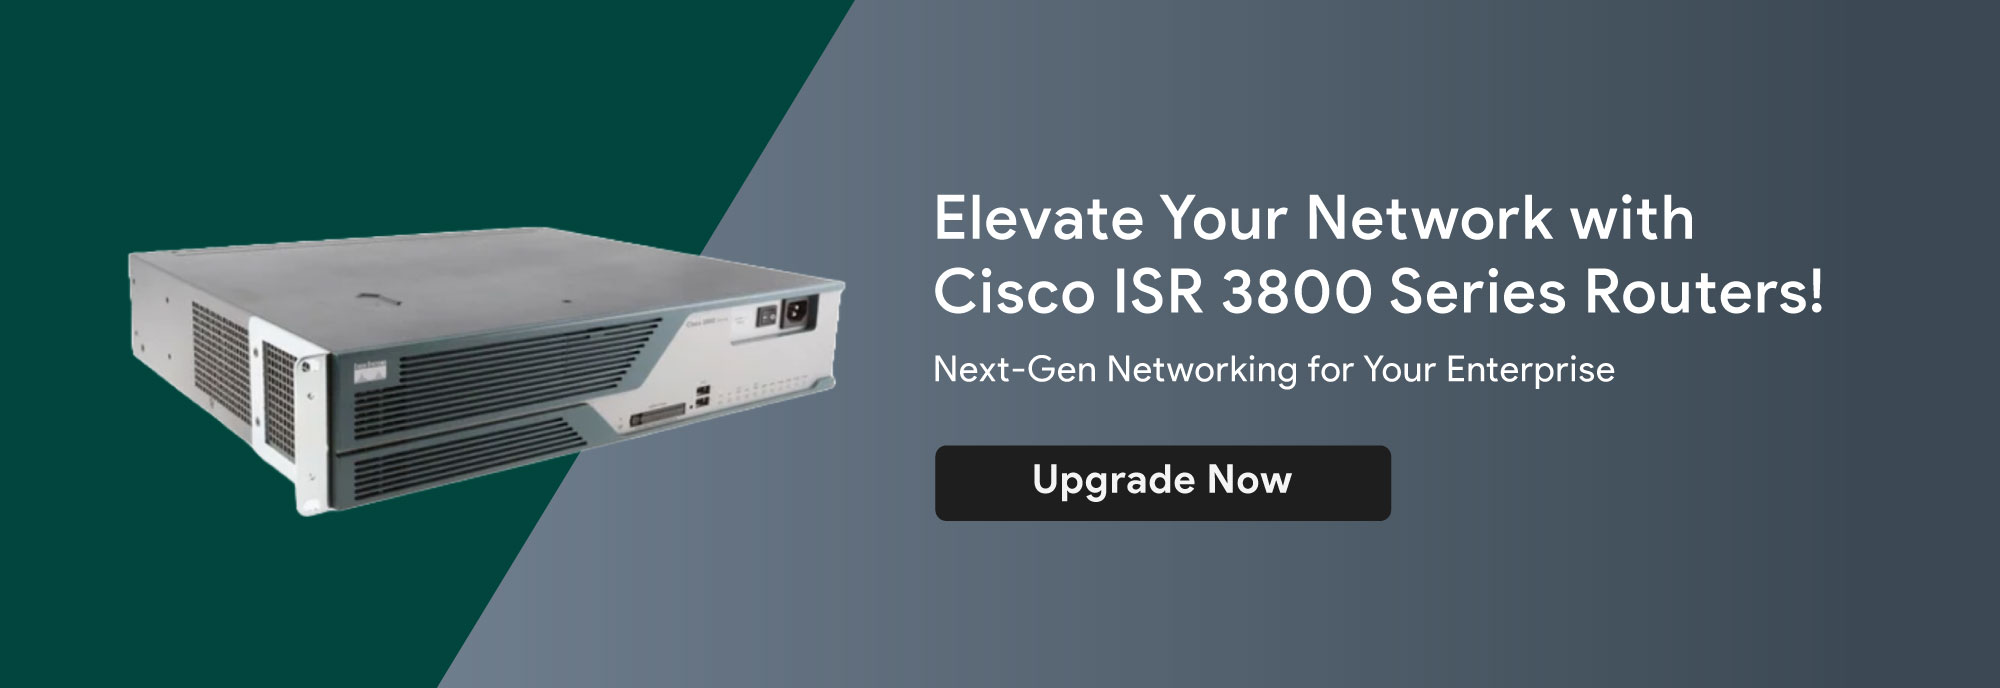 Cisco-ISR-3800-Series-Routers